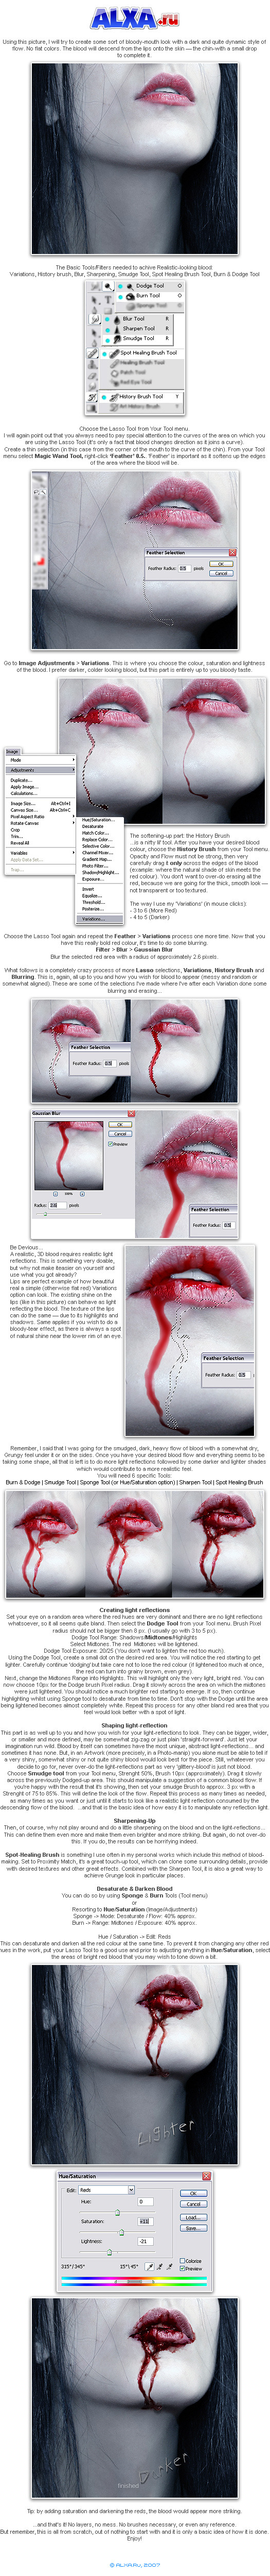 Create your bloody effects using this steps and a simple help with photoshop